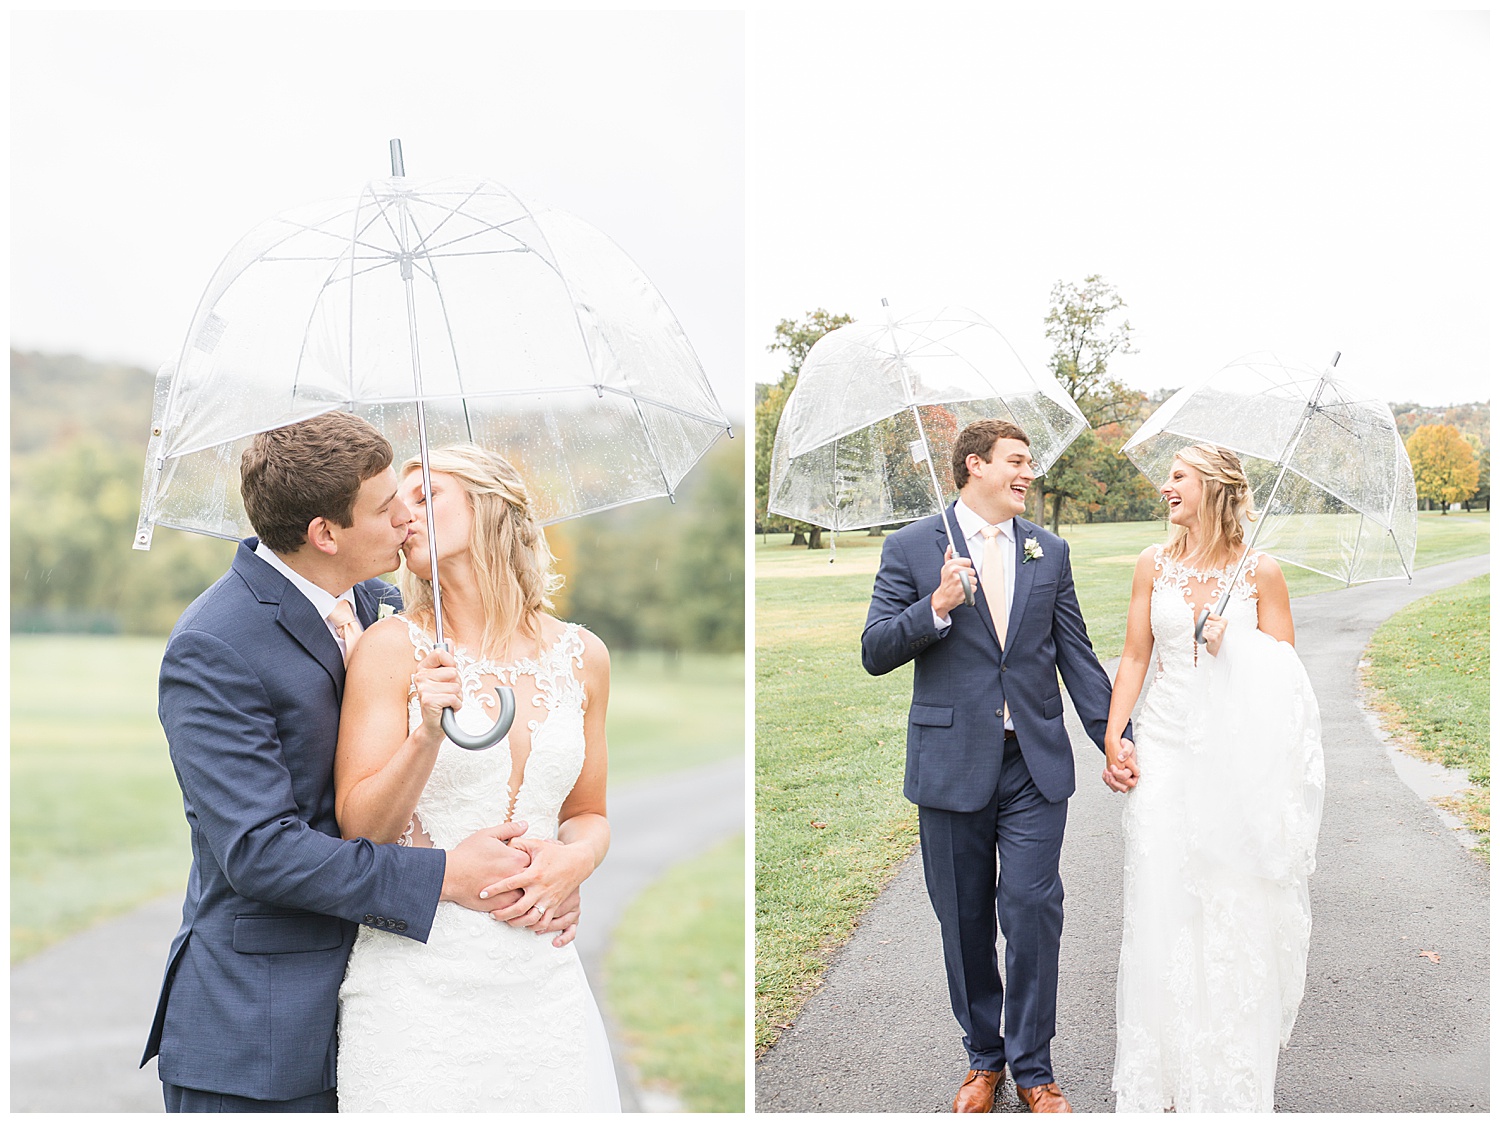 Bride and Groom with Umbrellas - Twin Oaks Golf and Plantation Club Wedding - Rainy Wedding Pictures